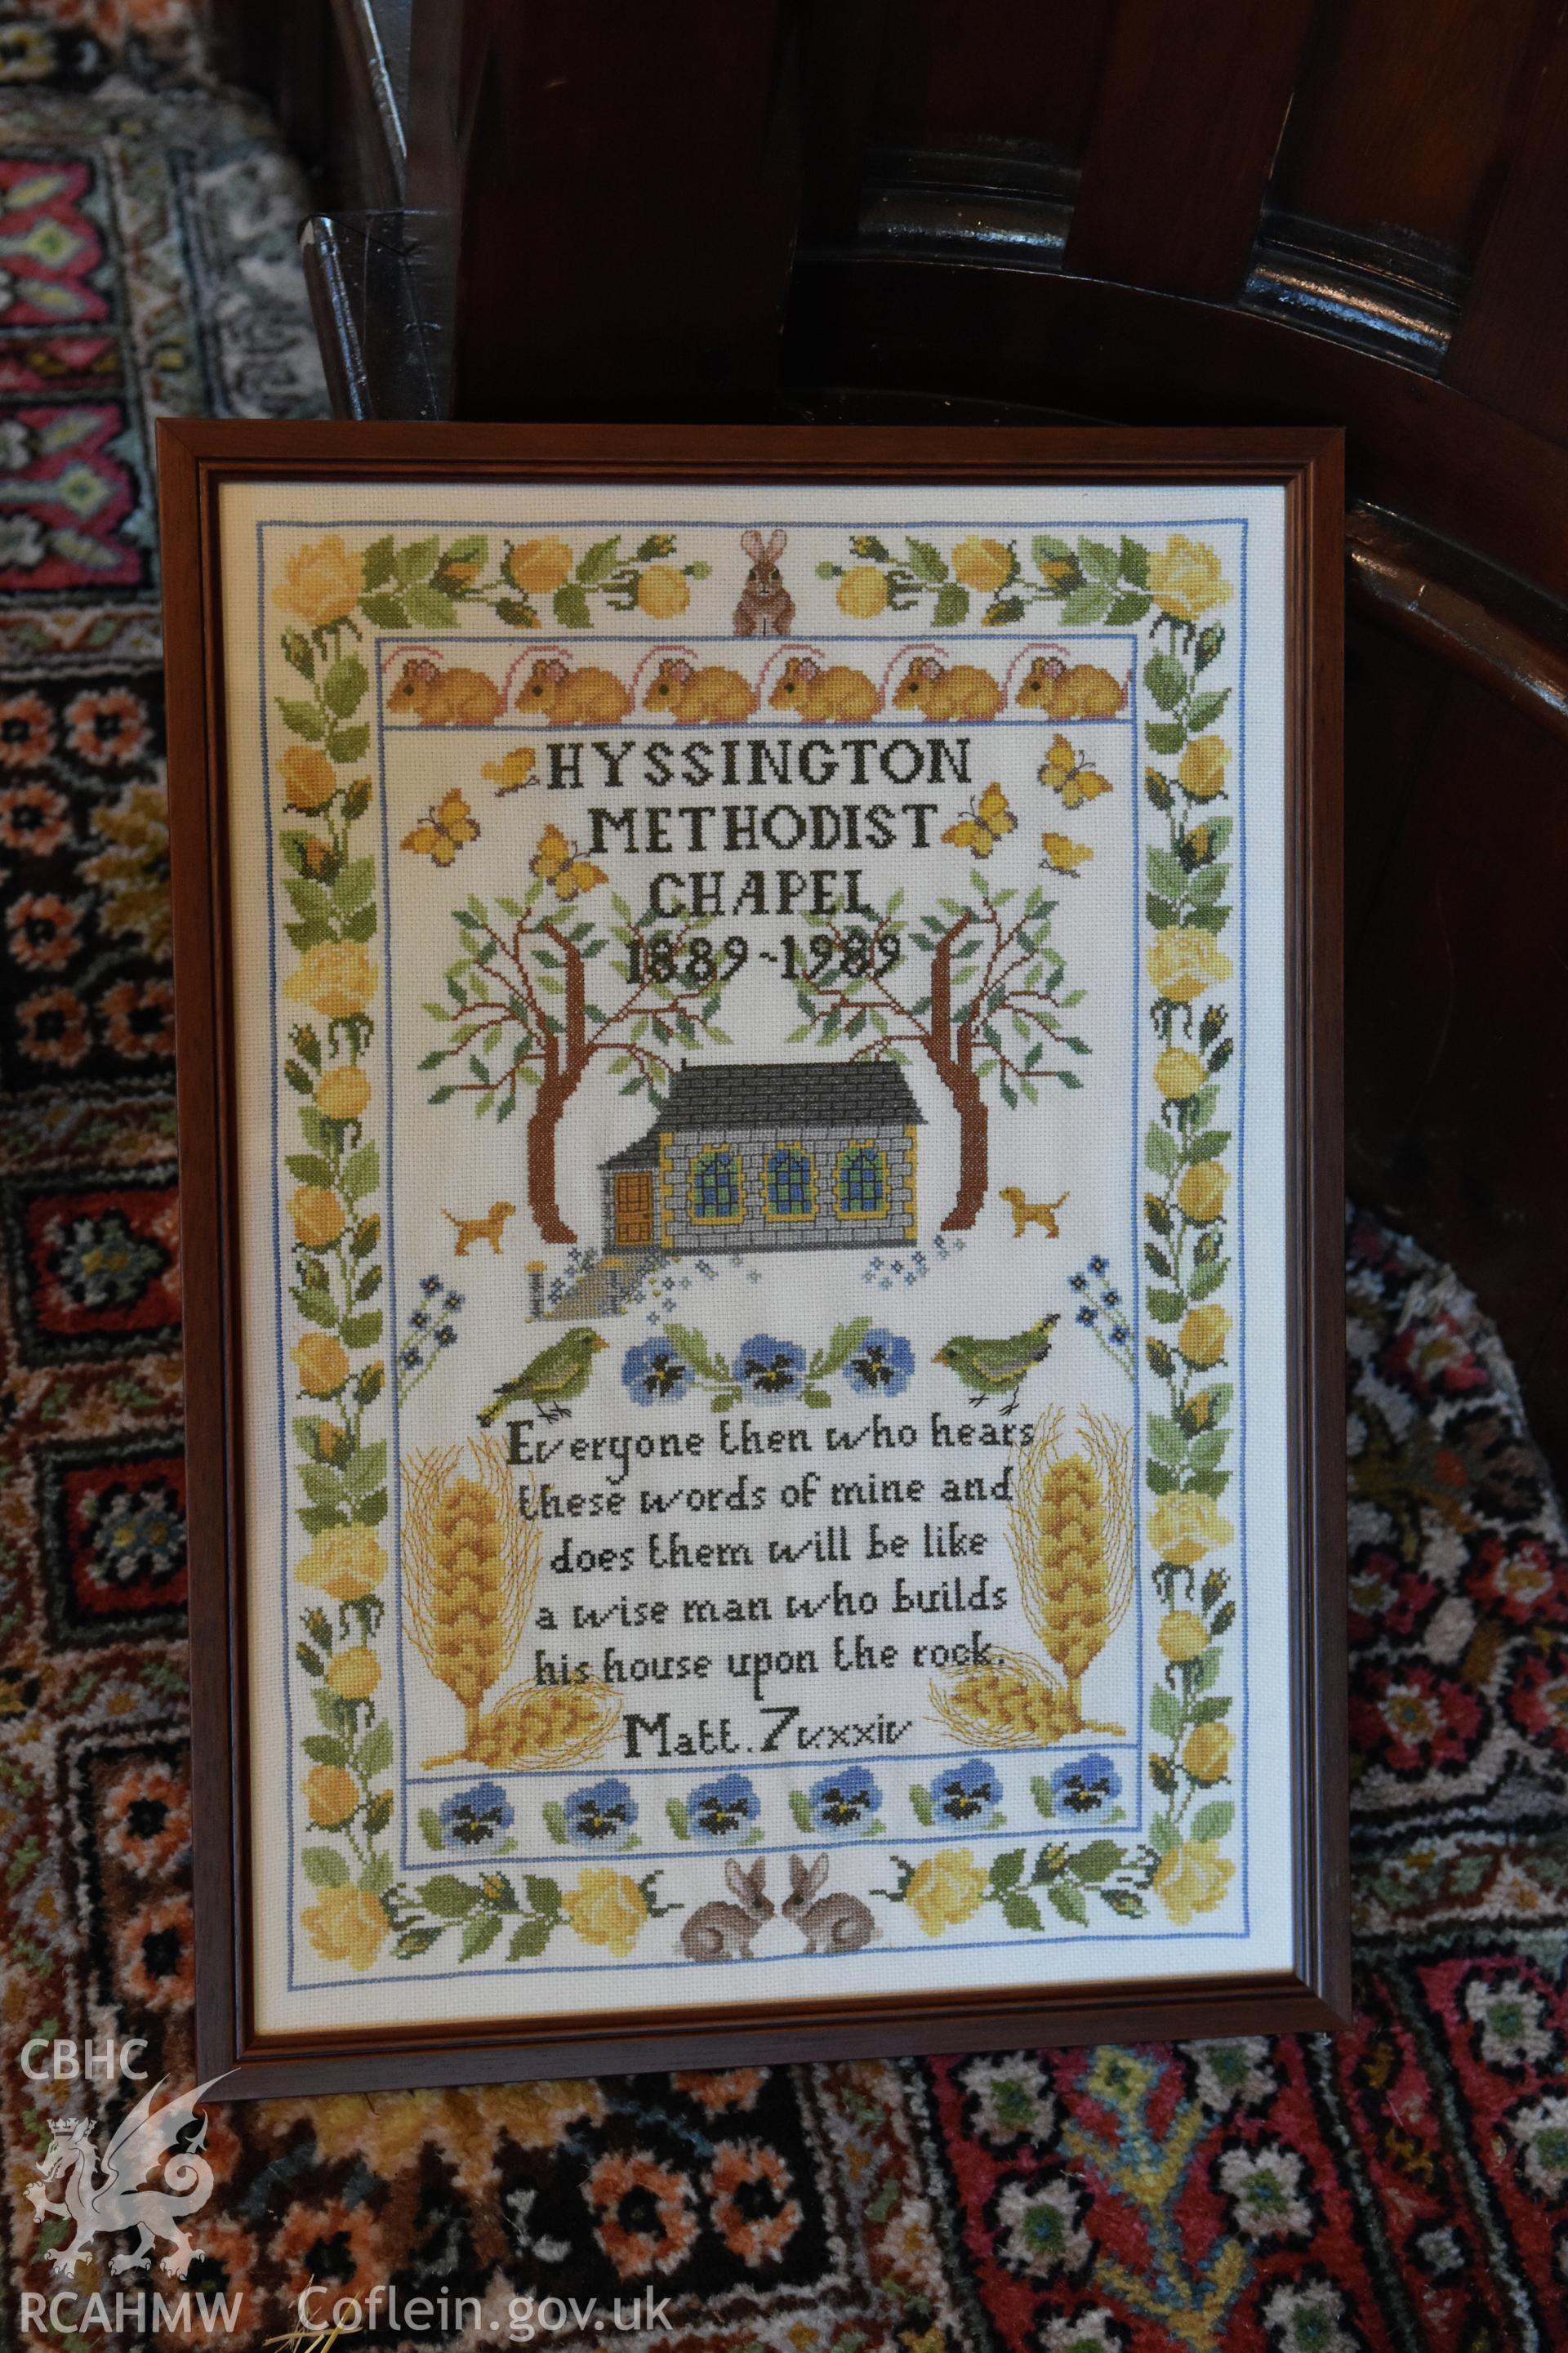 Photograph of framed, crossed-stitched embroidery illustrating Matthew. 7 vxxix from the Bible at Hyssington Primitive Methodist Chapel, Hyssington, Churchstoke. Photographic survey conducted by Sue Fielding on 7th December 2018.